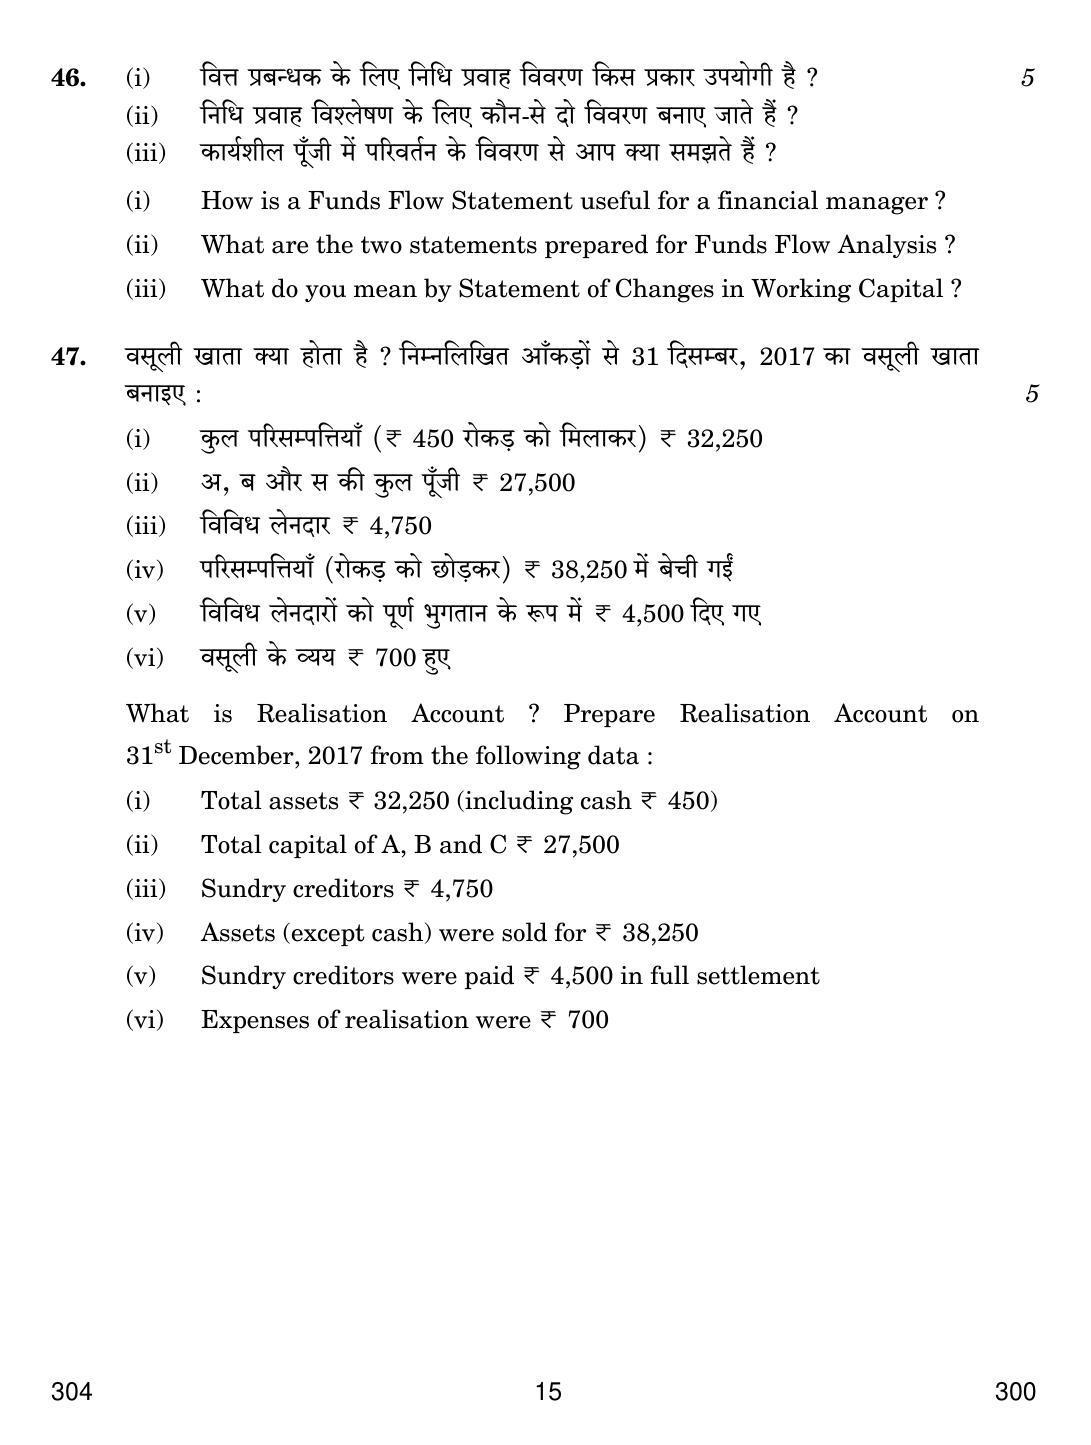 CBSE Class 12 304 FINANCIAL ACCOUNTING 2018 Question Paper - Page 15